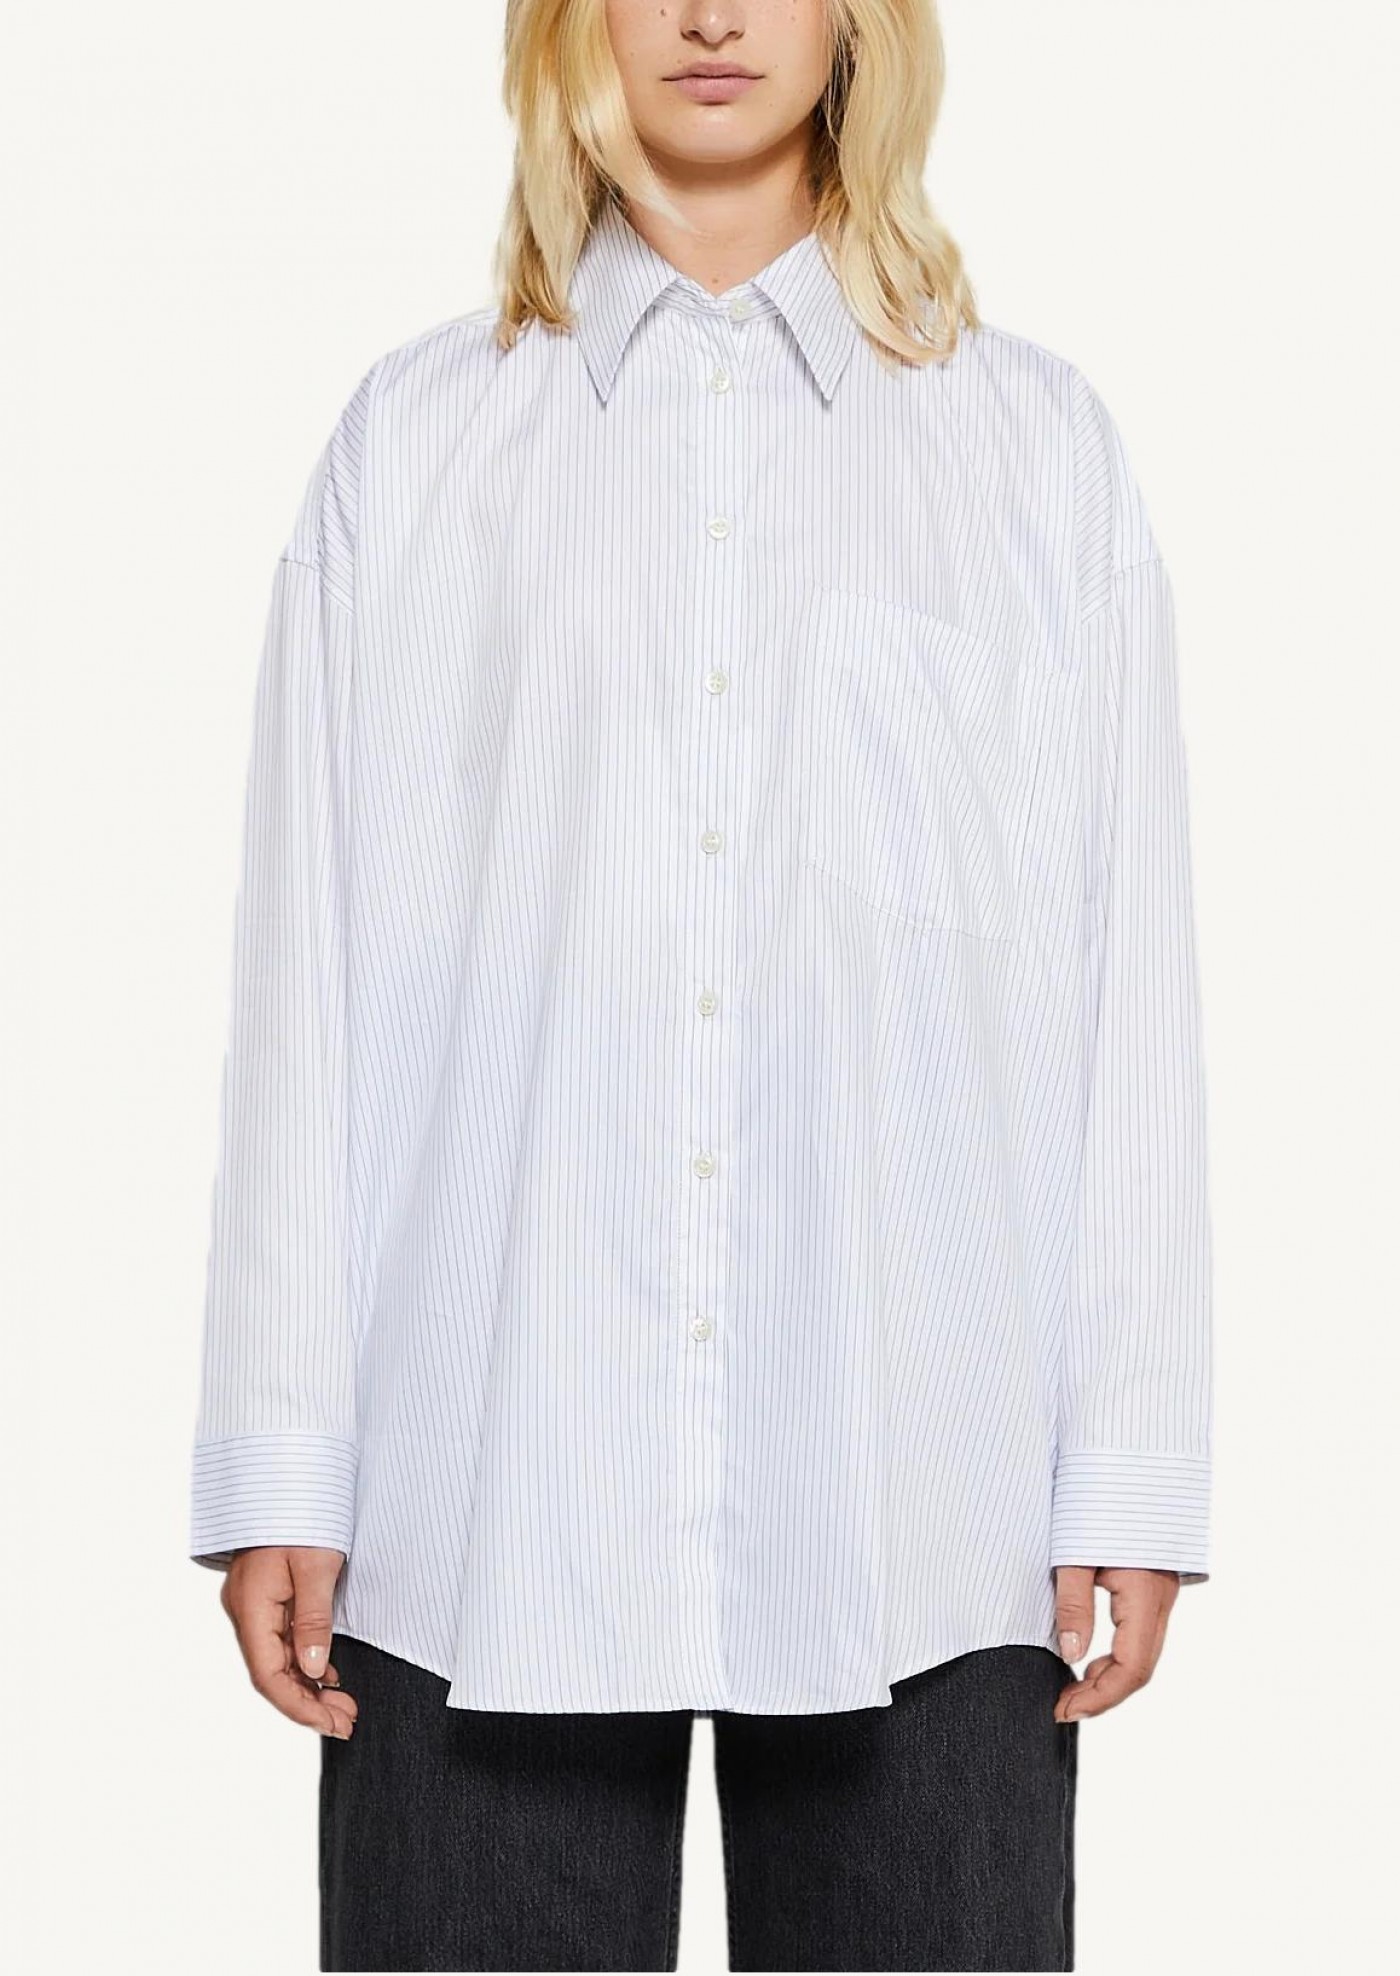 Striped button-up shirt in white and blue